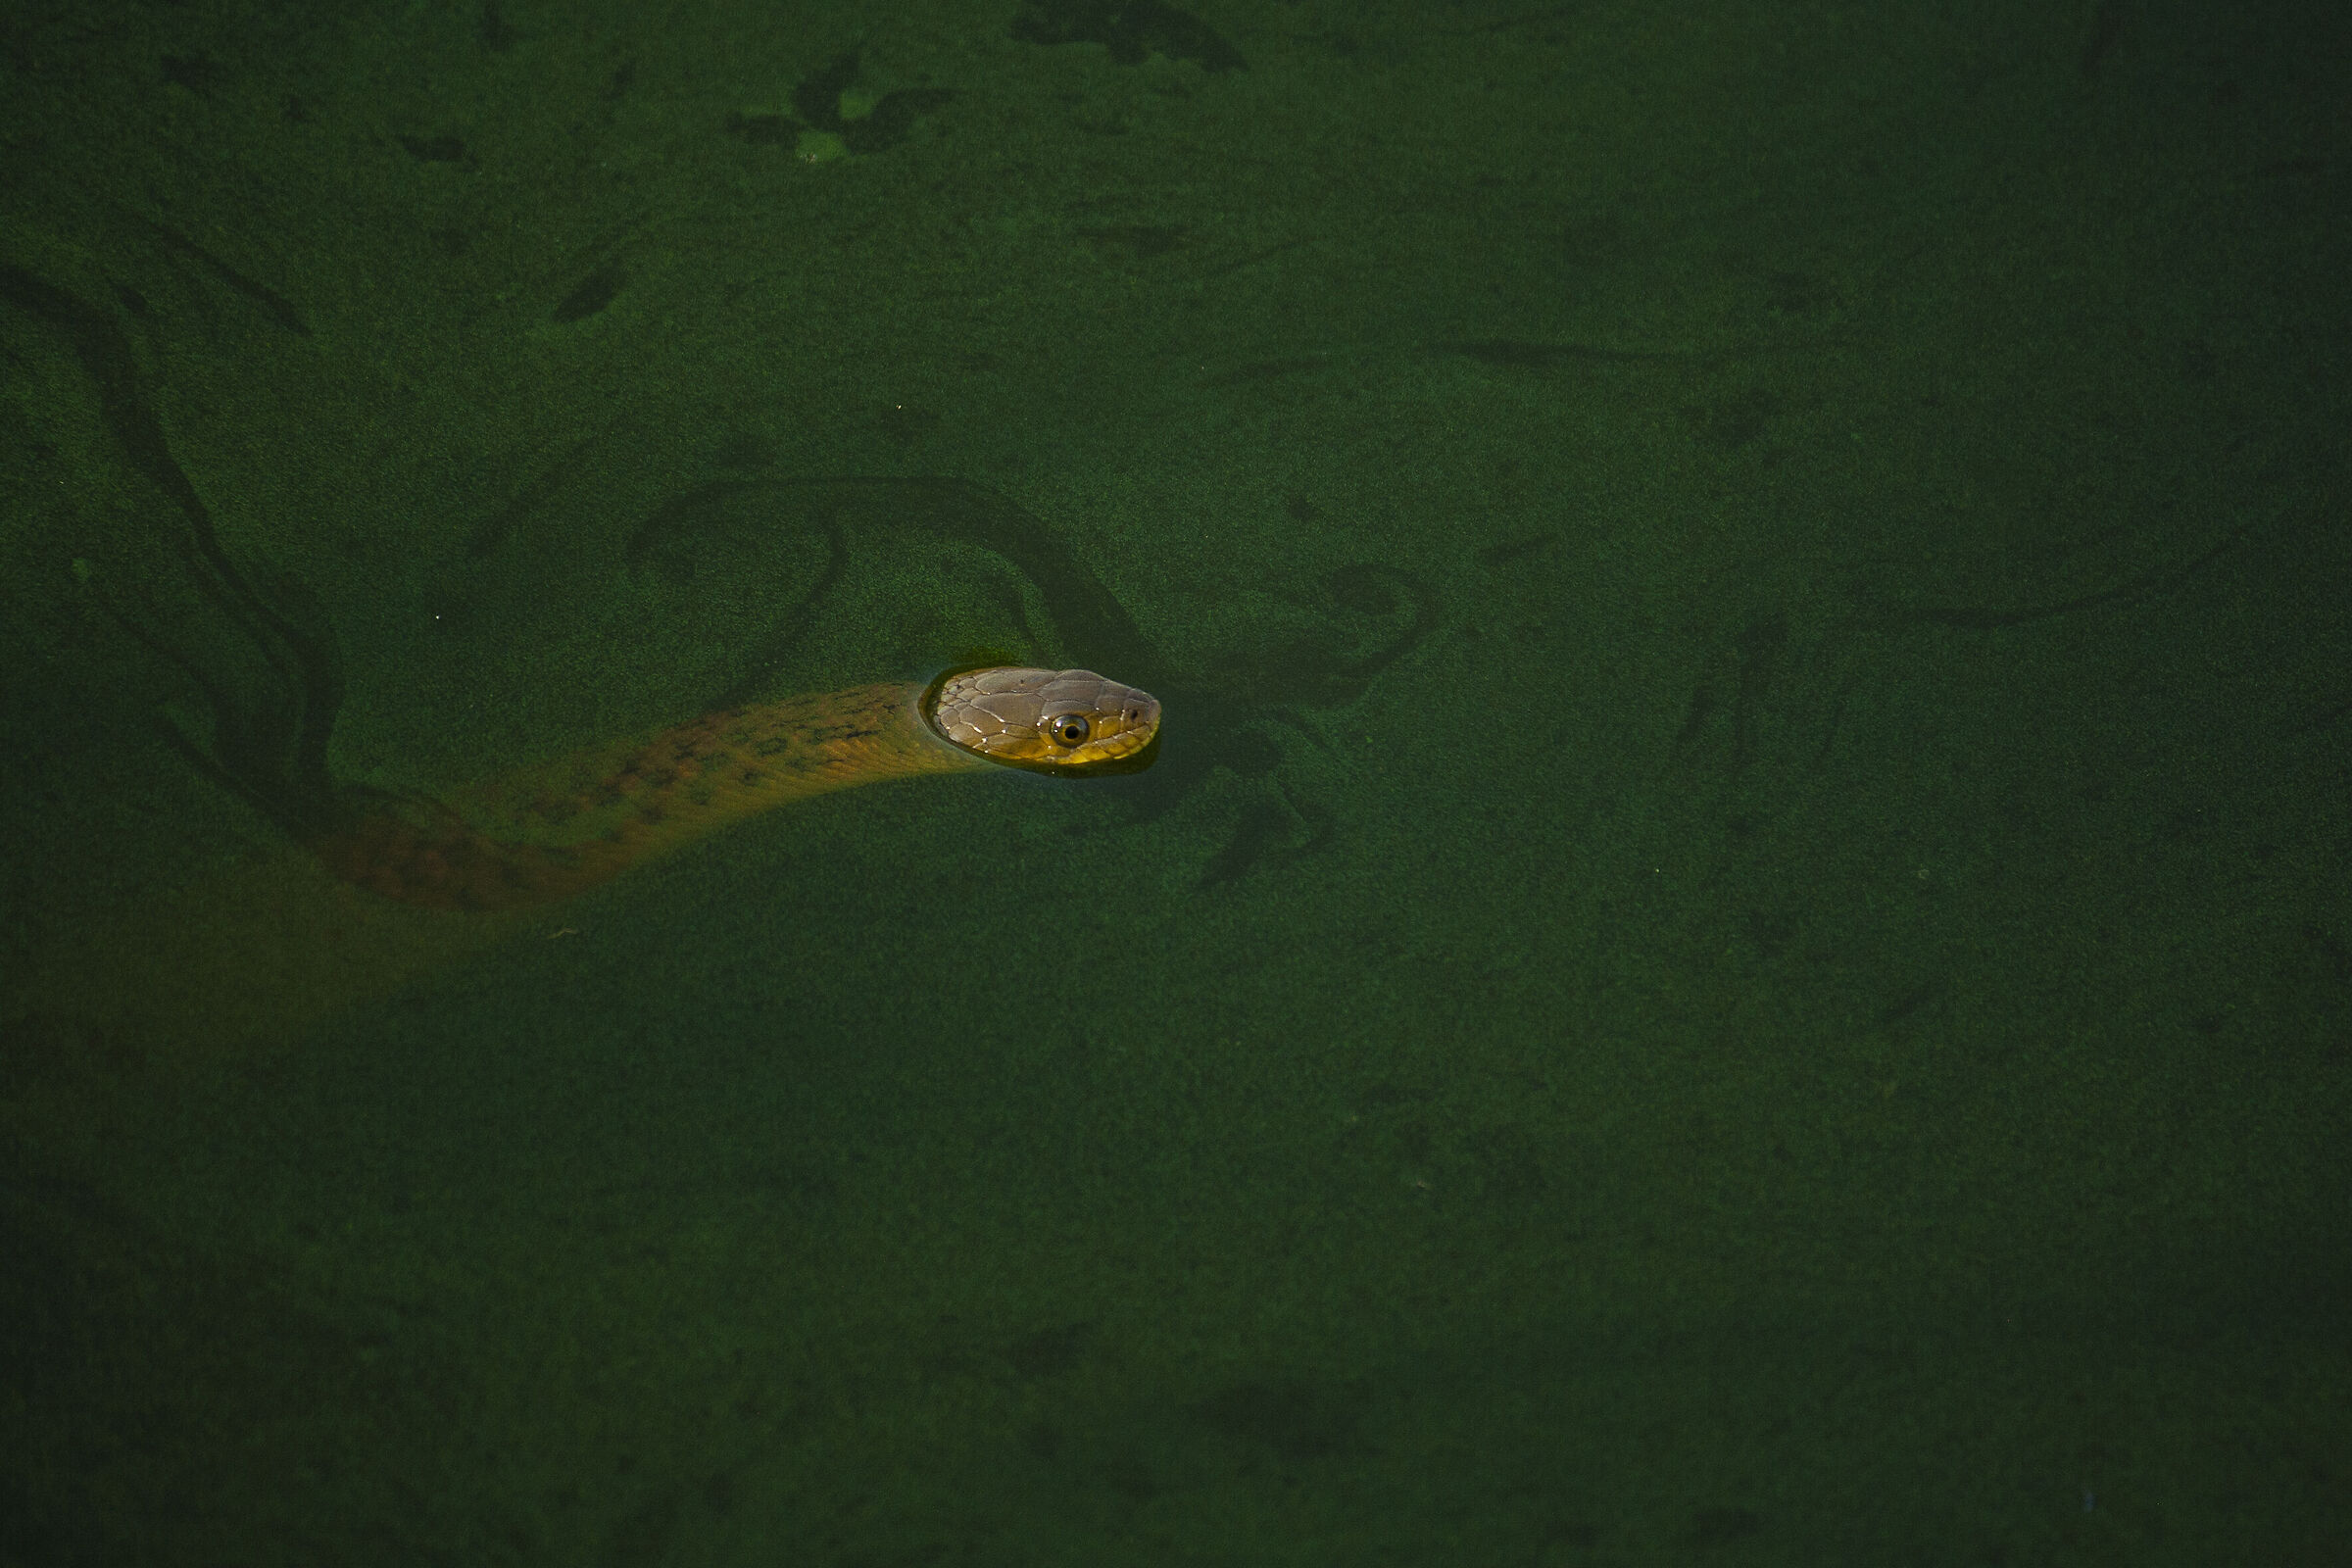 The Checkered Keelback water snake...